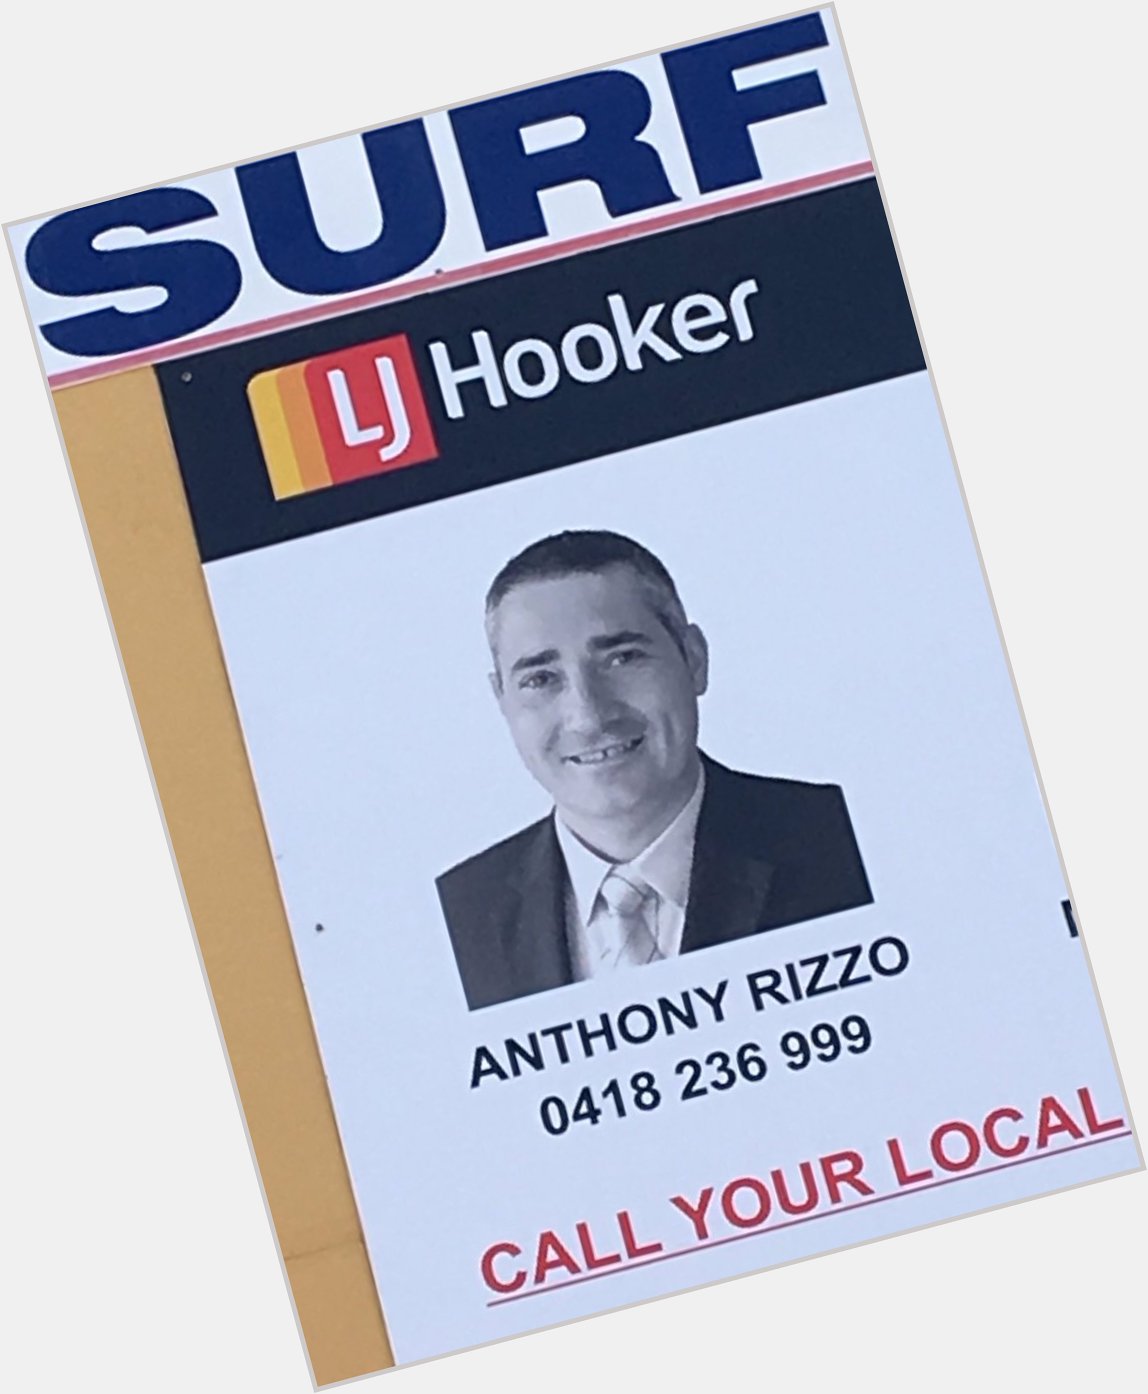 Happy birthday Anthony Rizzo! One of the best real estate agents in Sydney.  